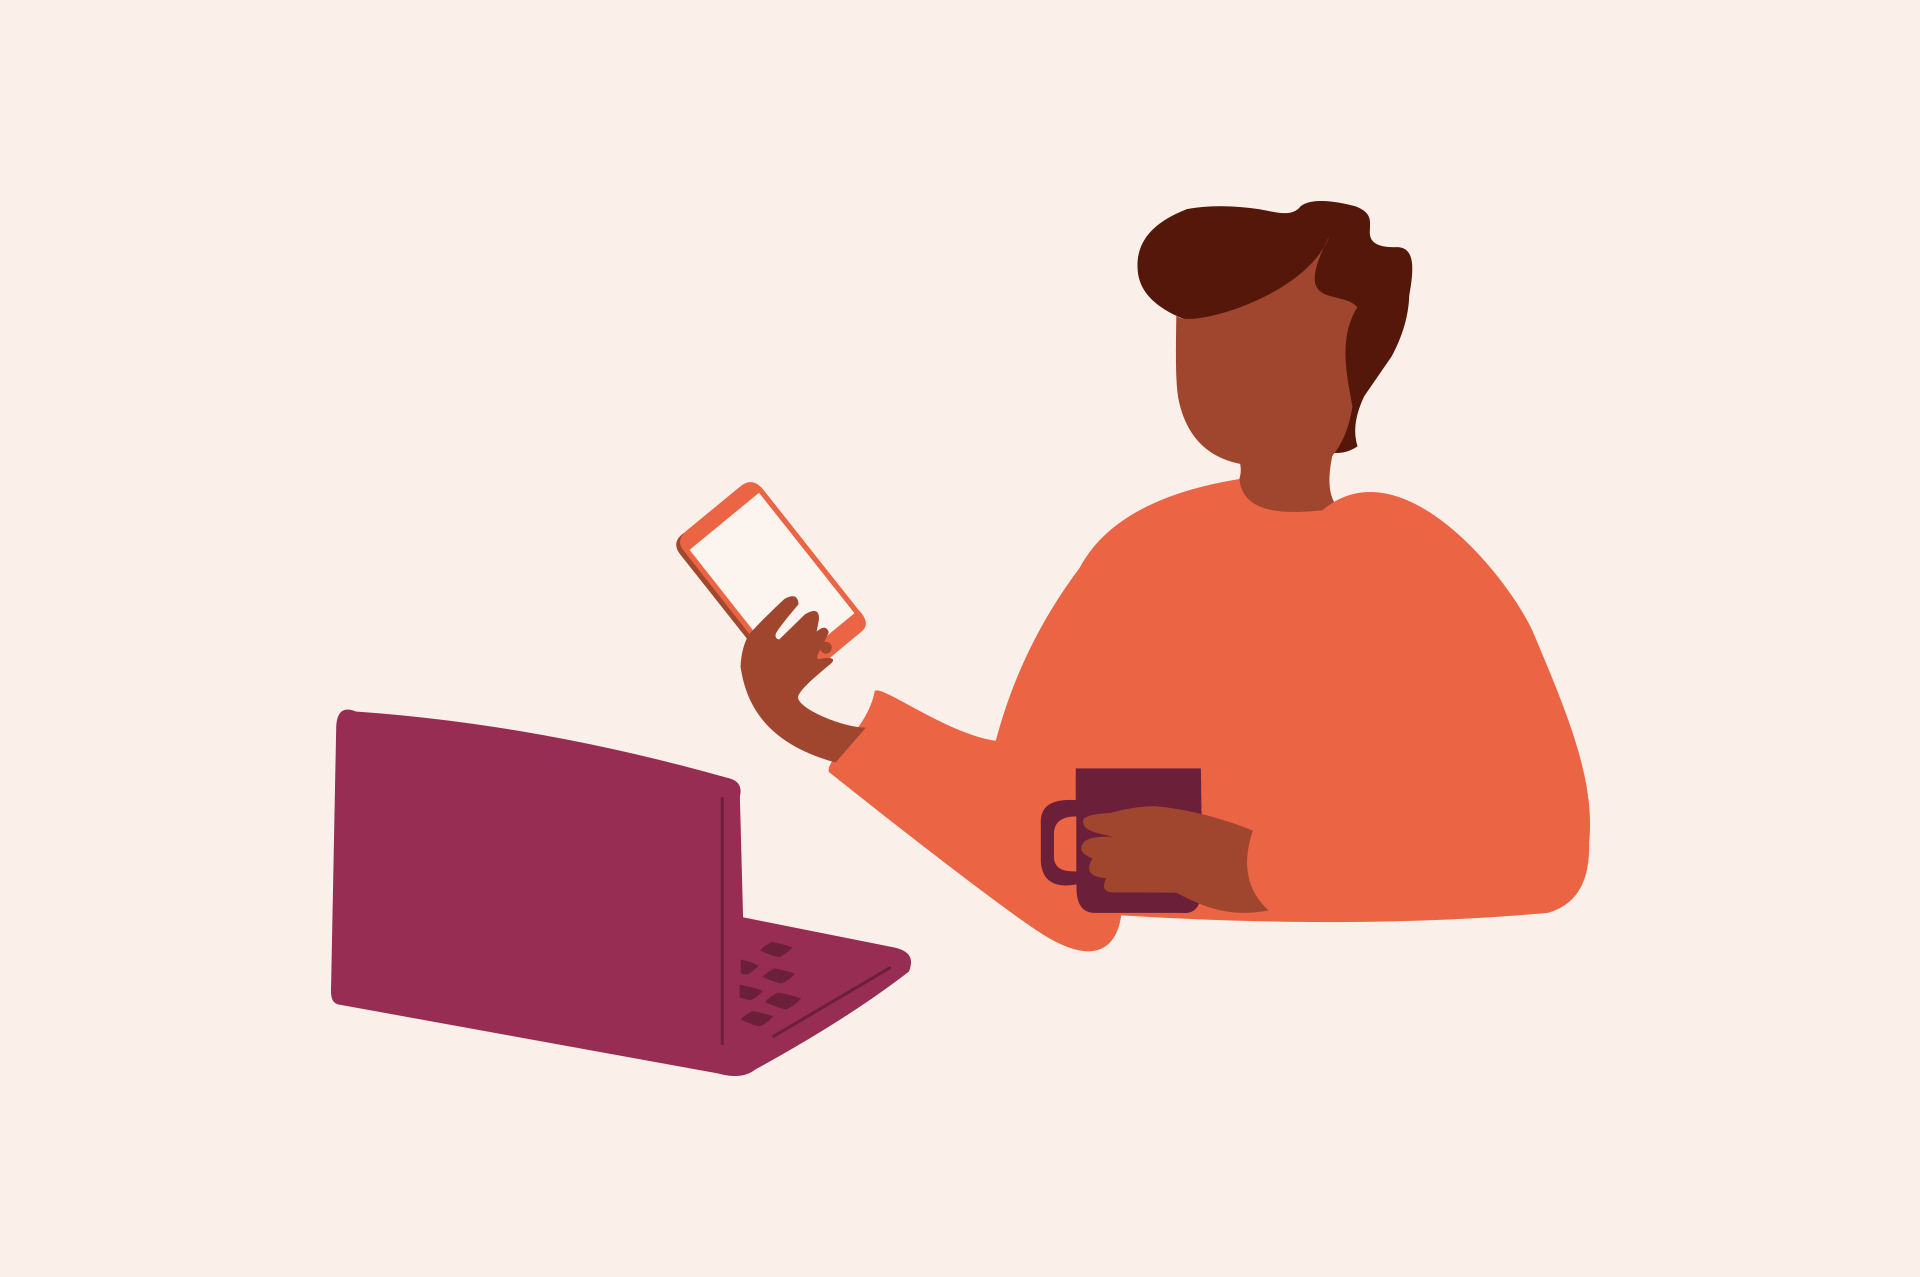 An illustration of a person having a computer in front of them, and a phone in one hand